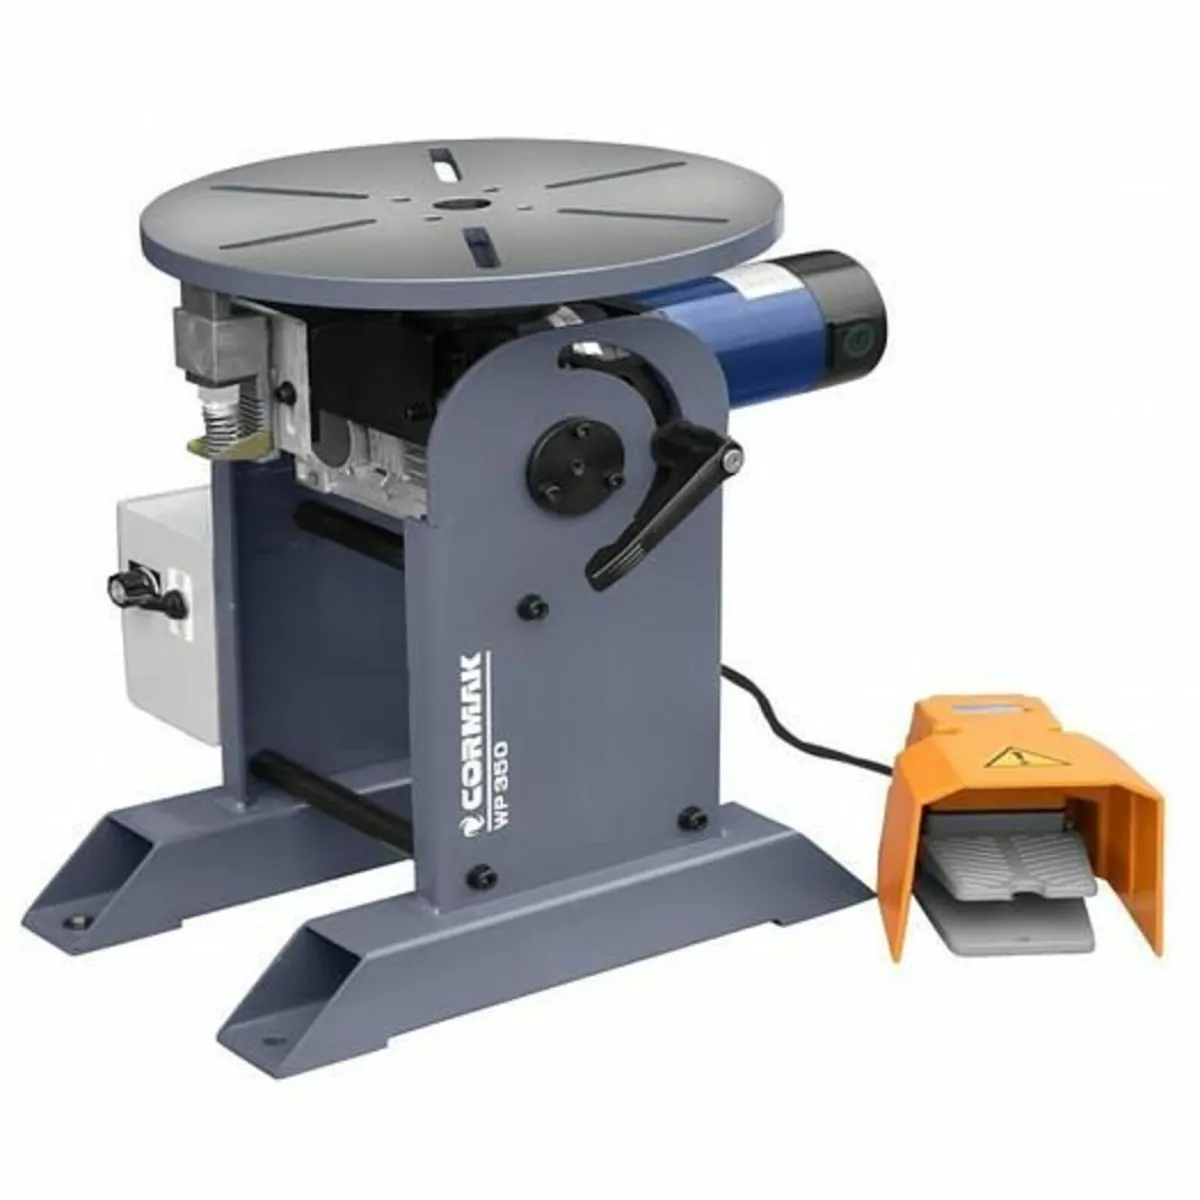 Cormak WP350 Rotary Welding Positioner Table